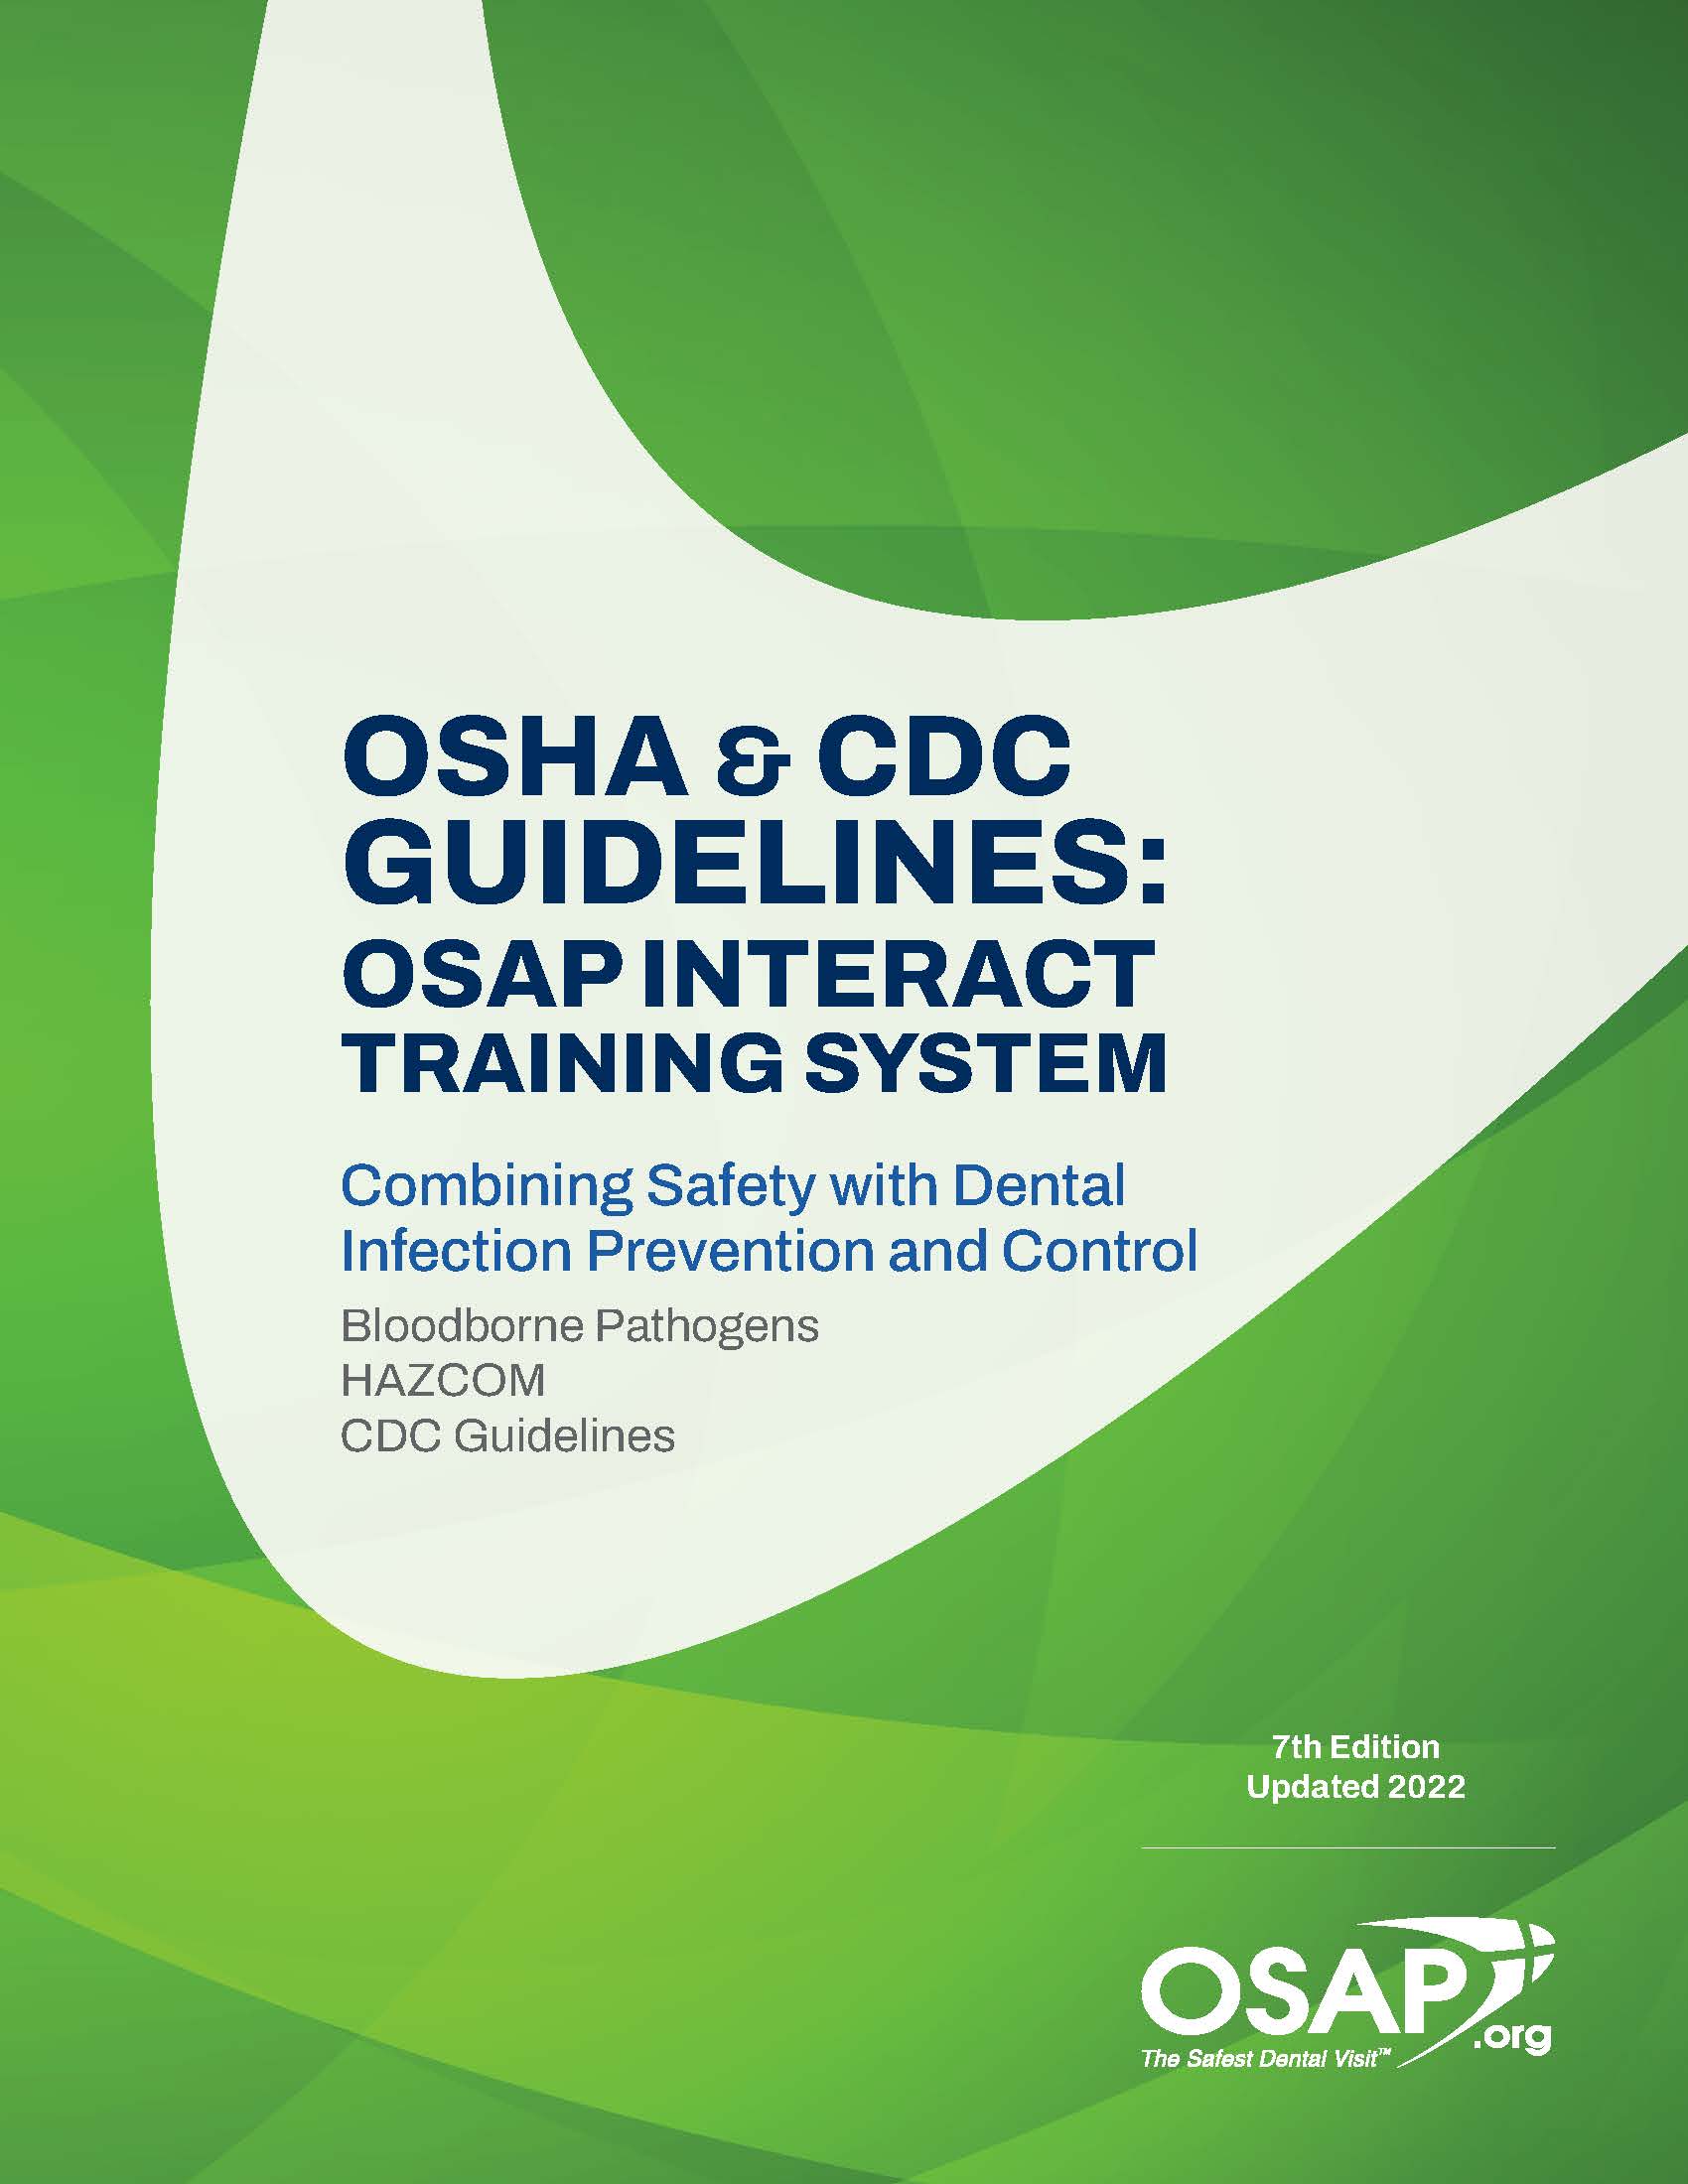 OSHA & CDC Guidelines OSAP Interact Training System 7th Edition OSAP